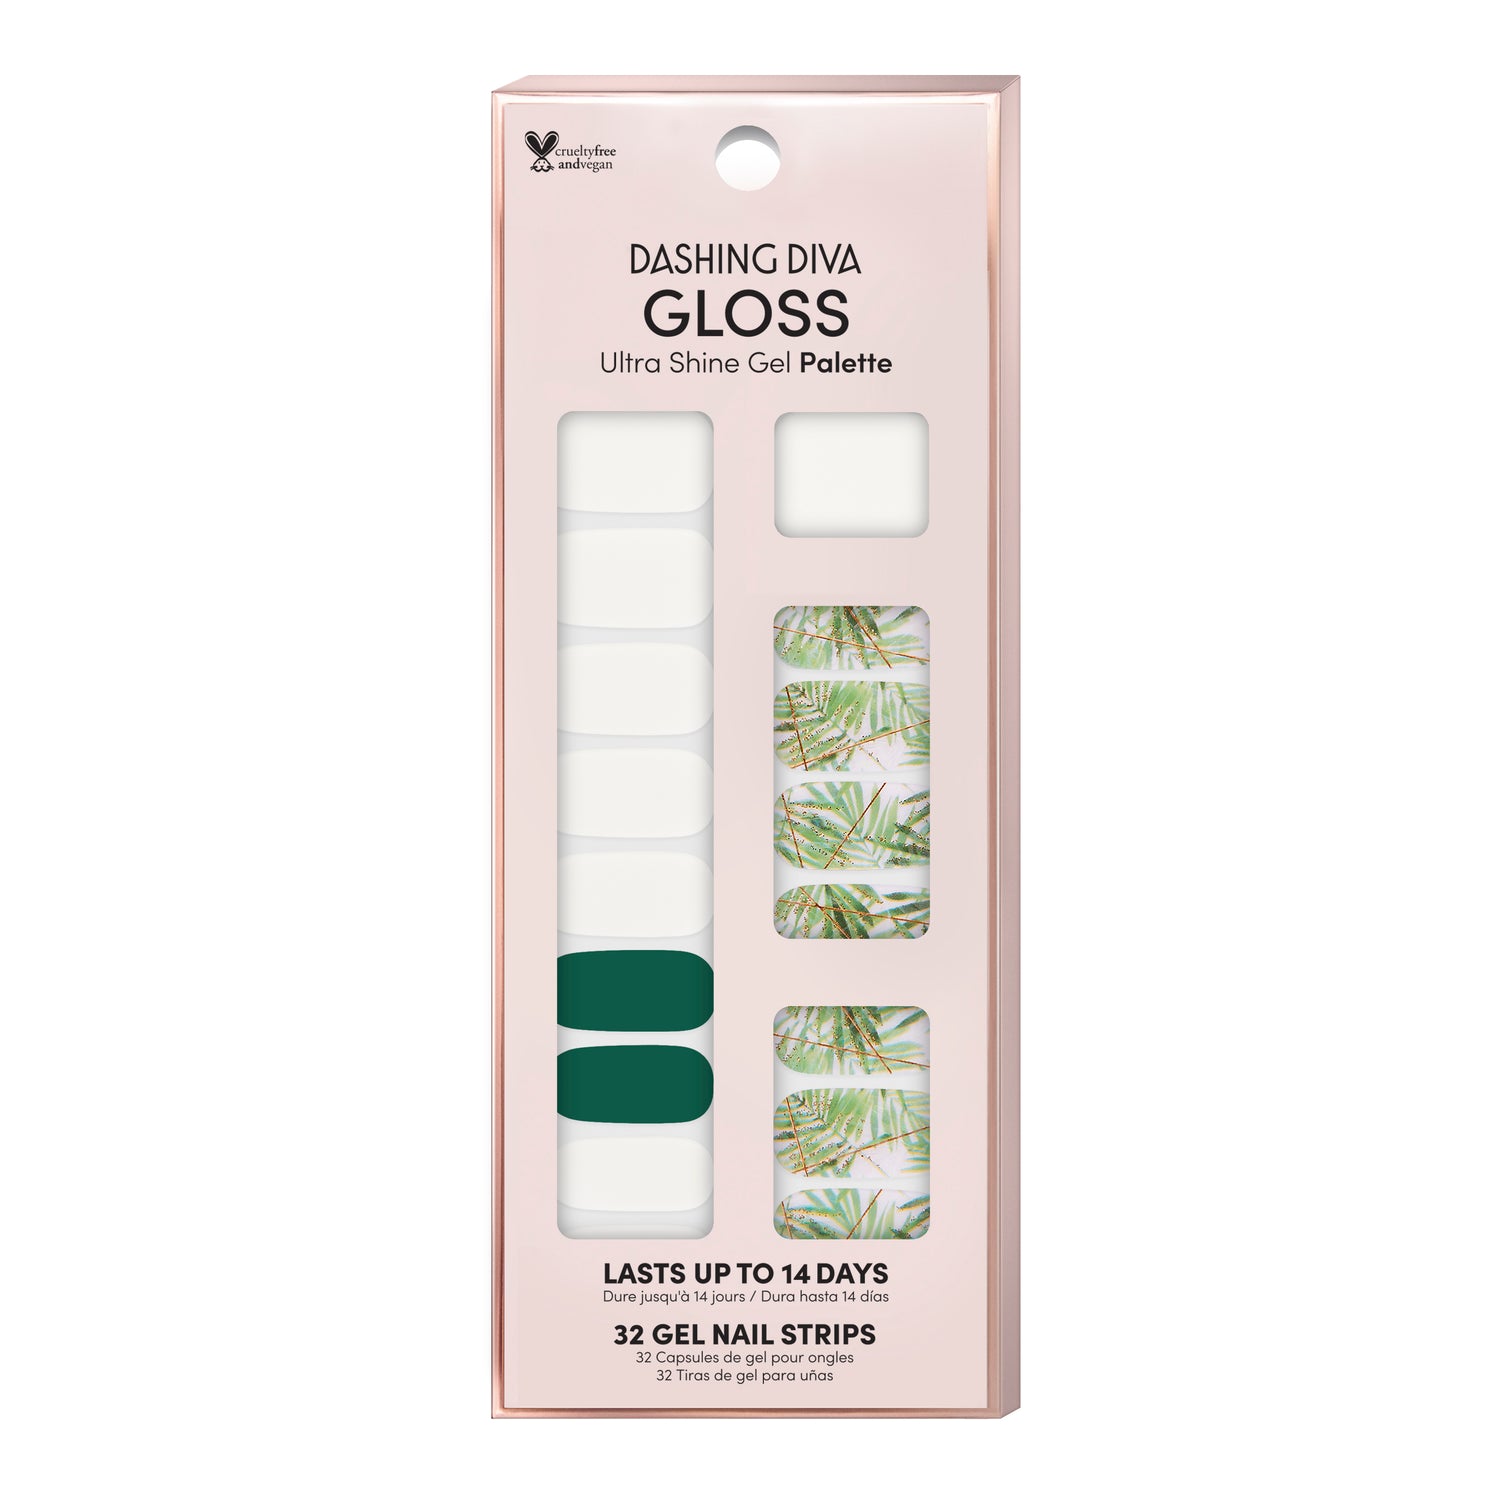 Sheer white and true green nail strips featuring palm leaf accents and gold foil details with a high-shine, glossy finish.